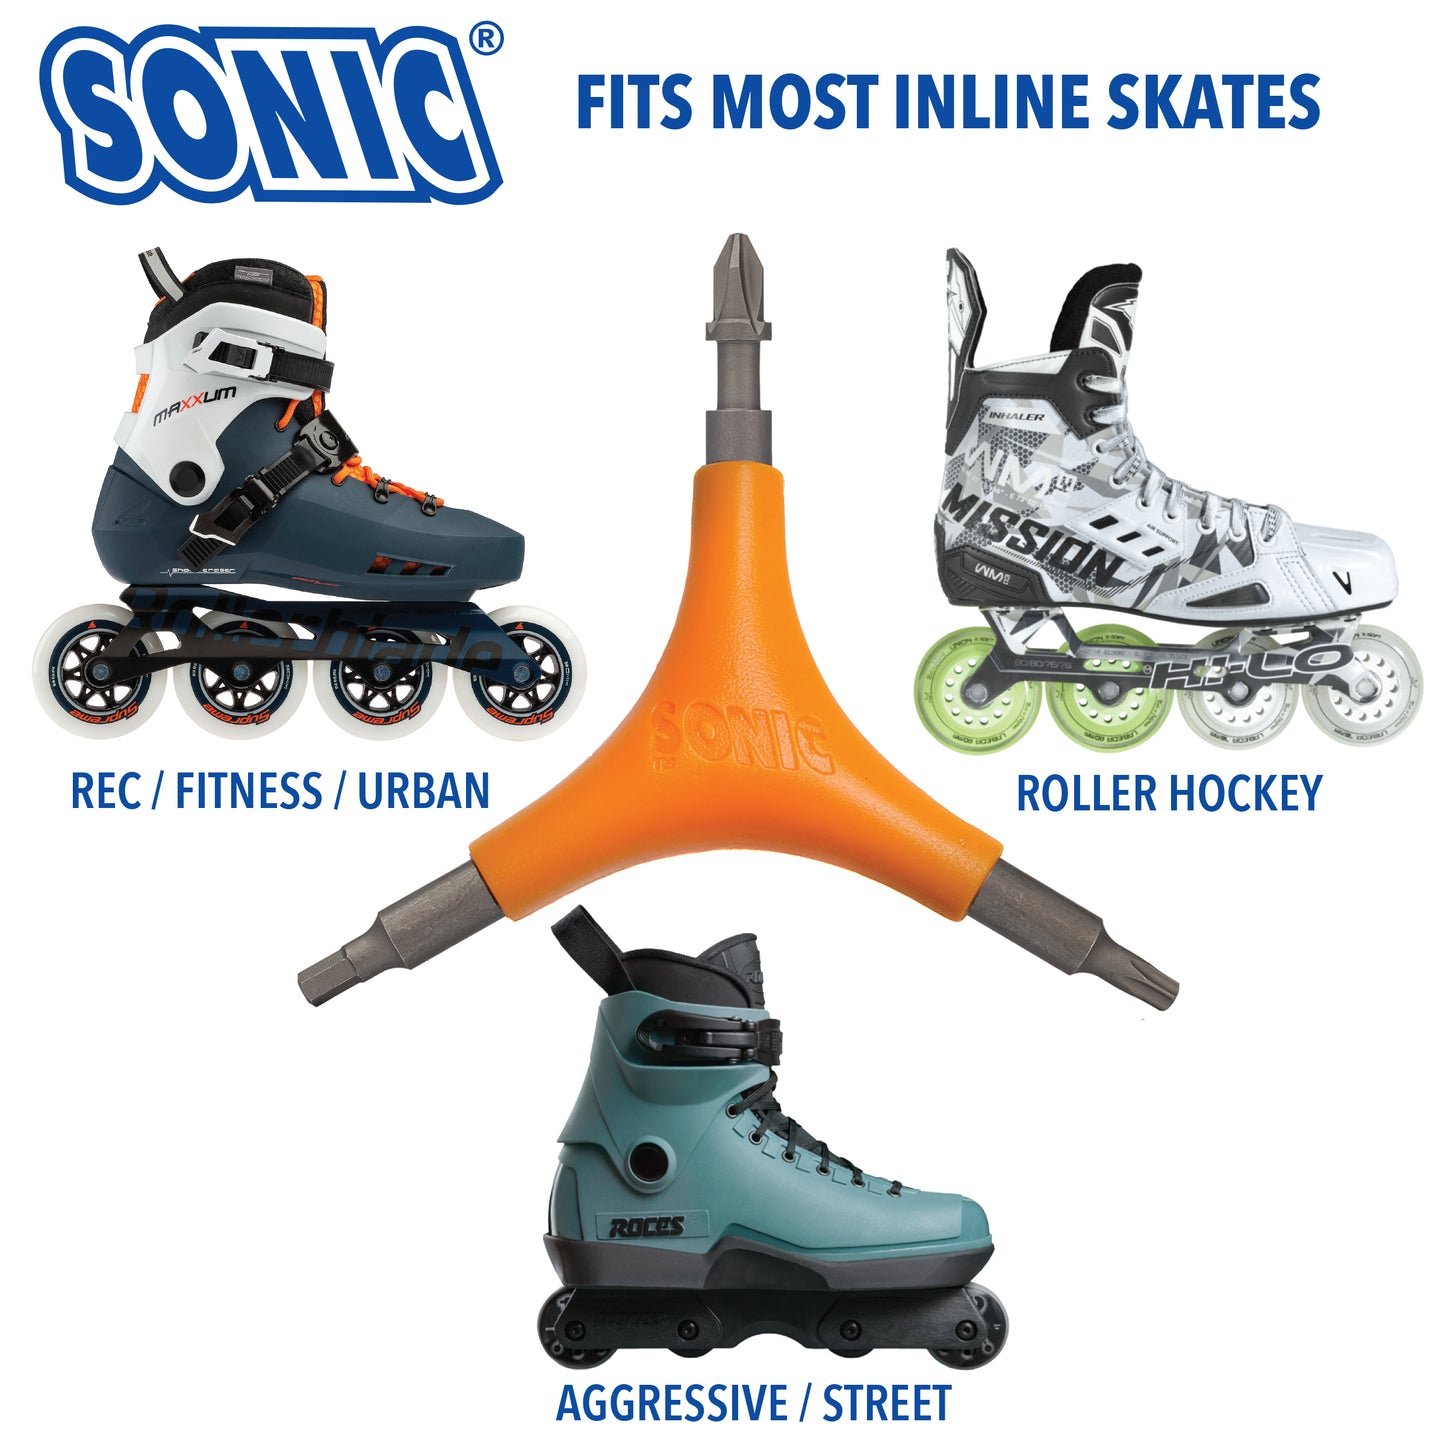 Sonic Sports Skate Tool (Assorted Colors)